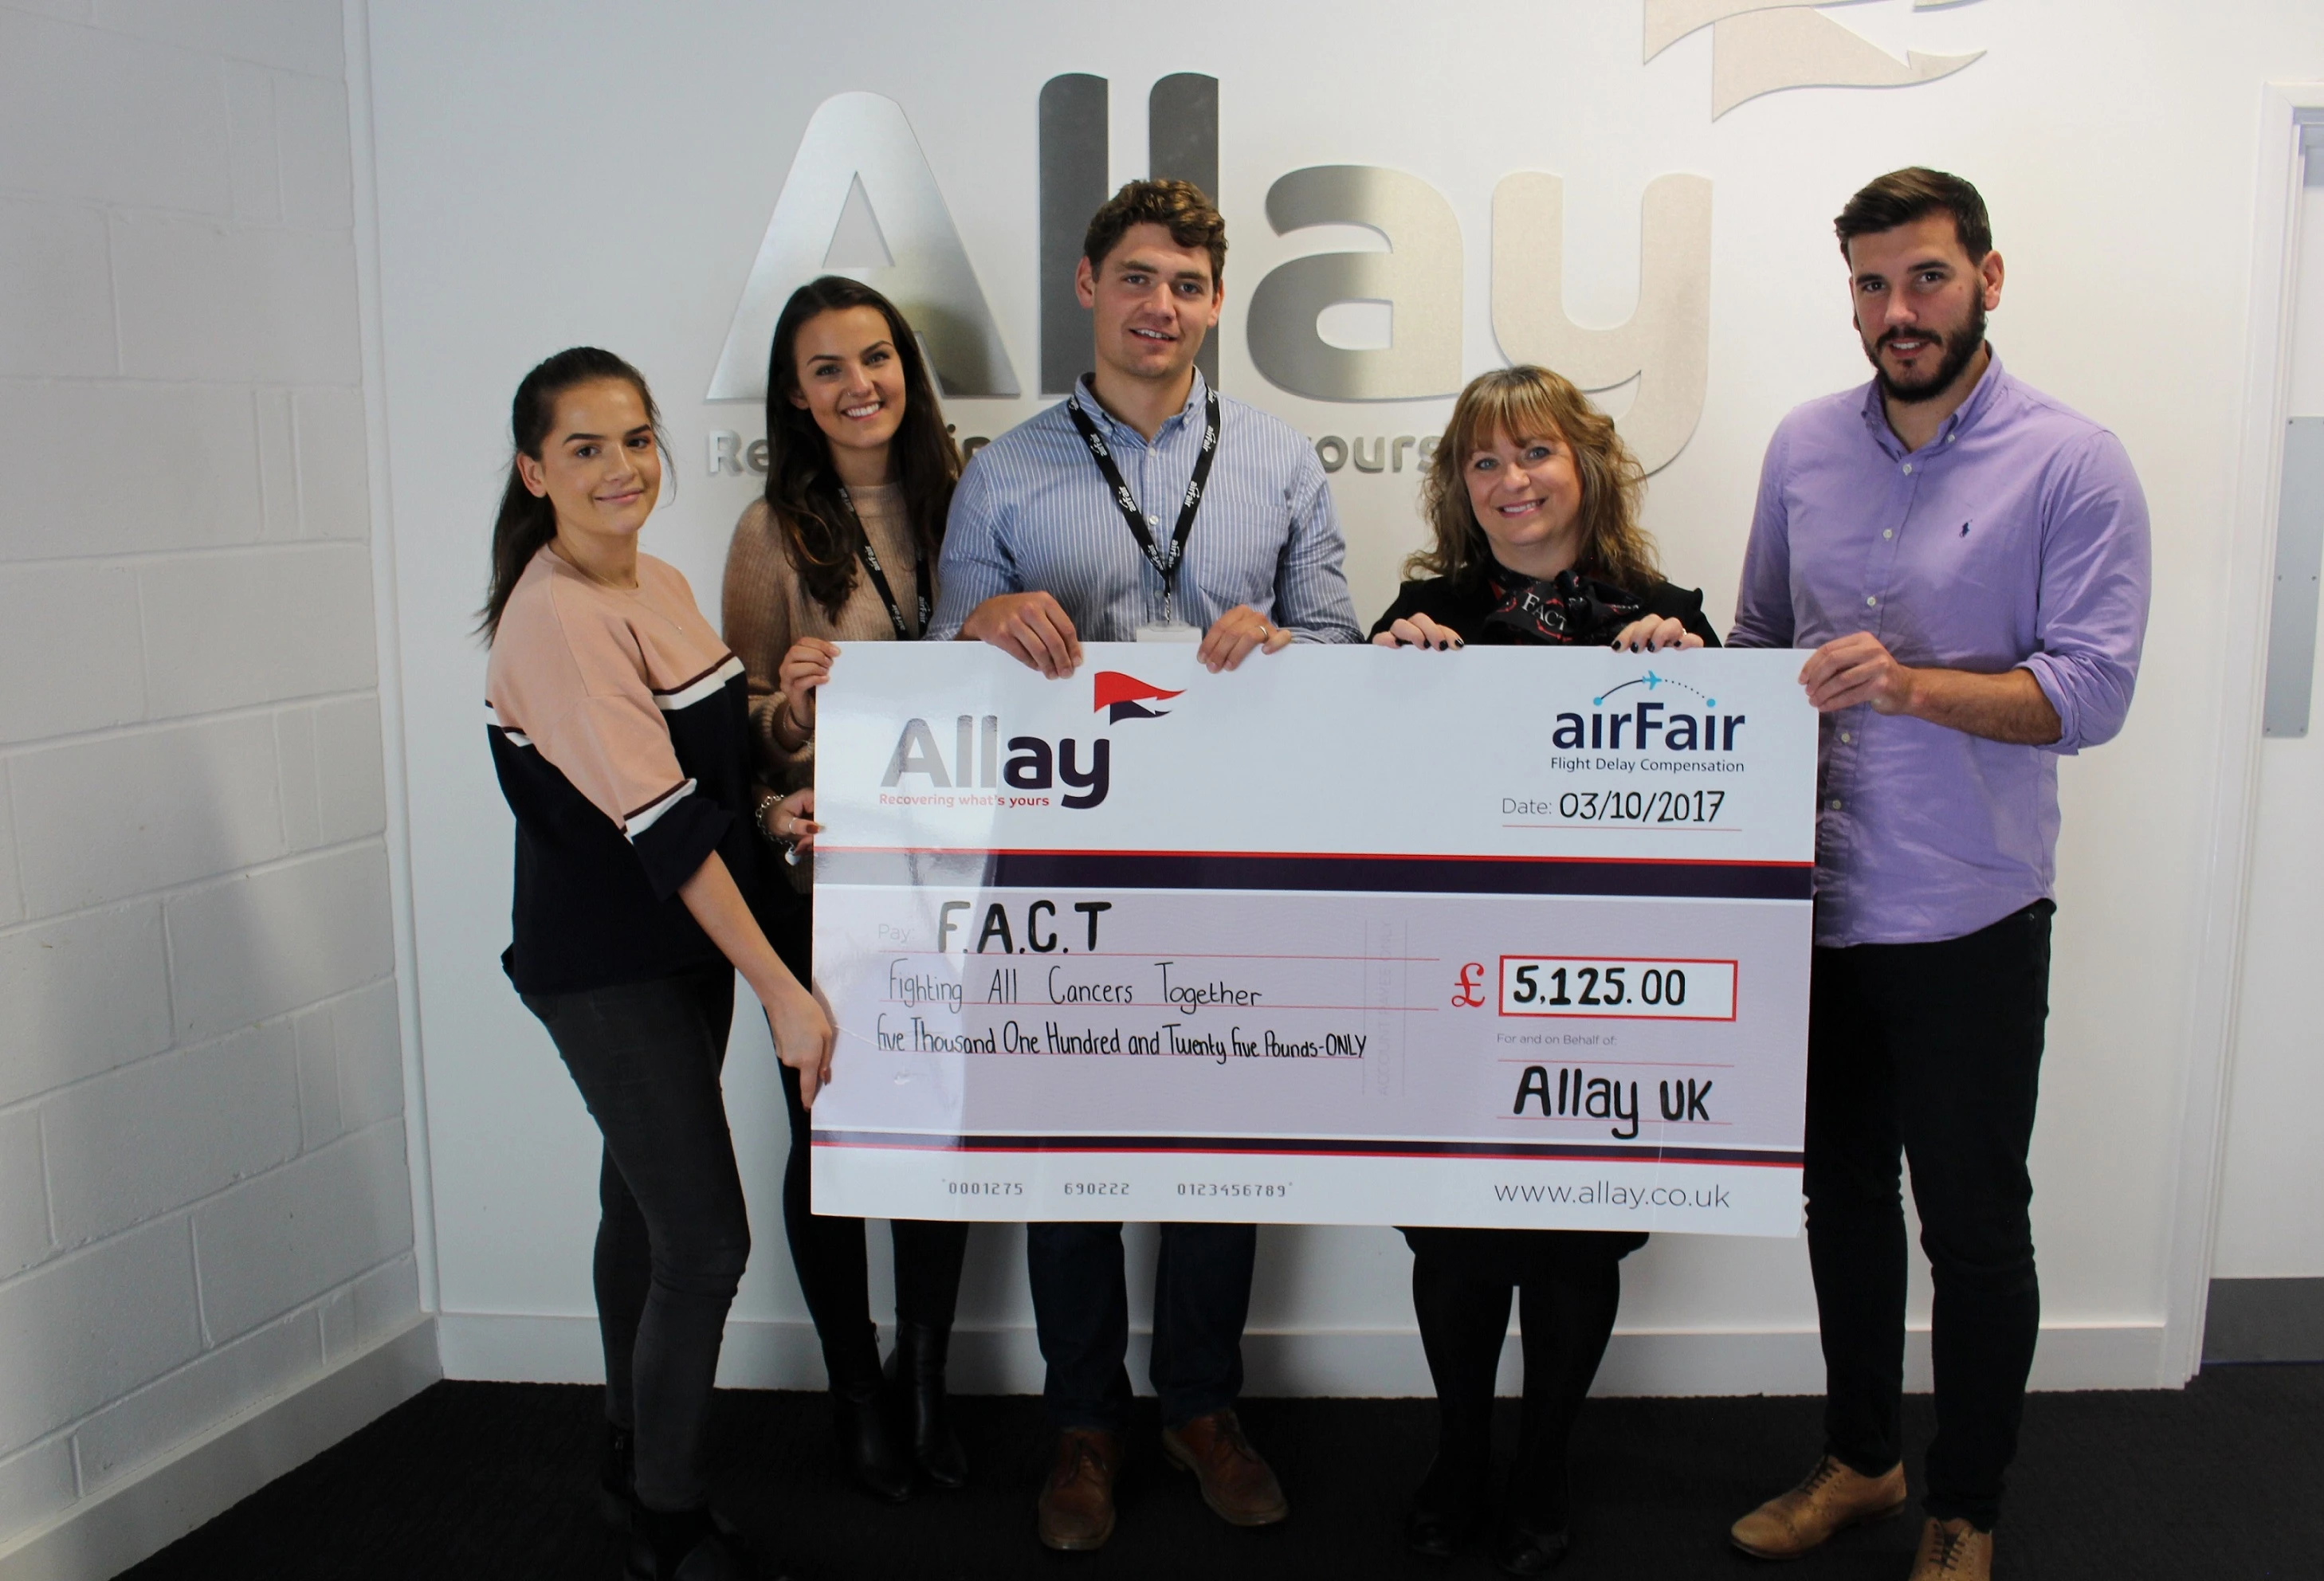 Newcastle business Allay raises over £5,000 for north east cancer charity